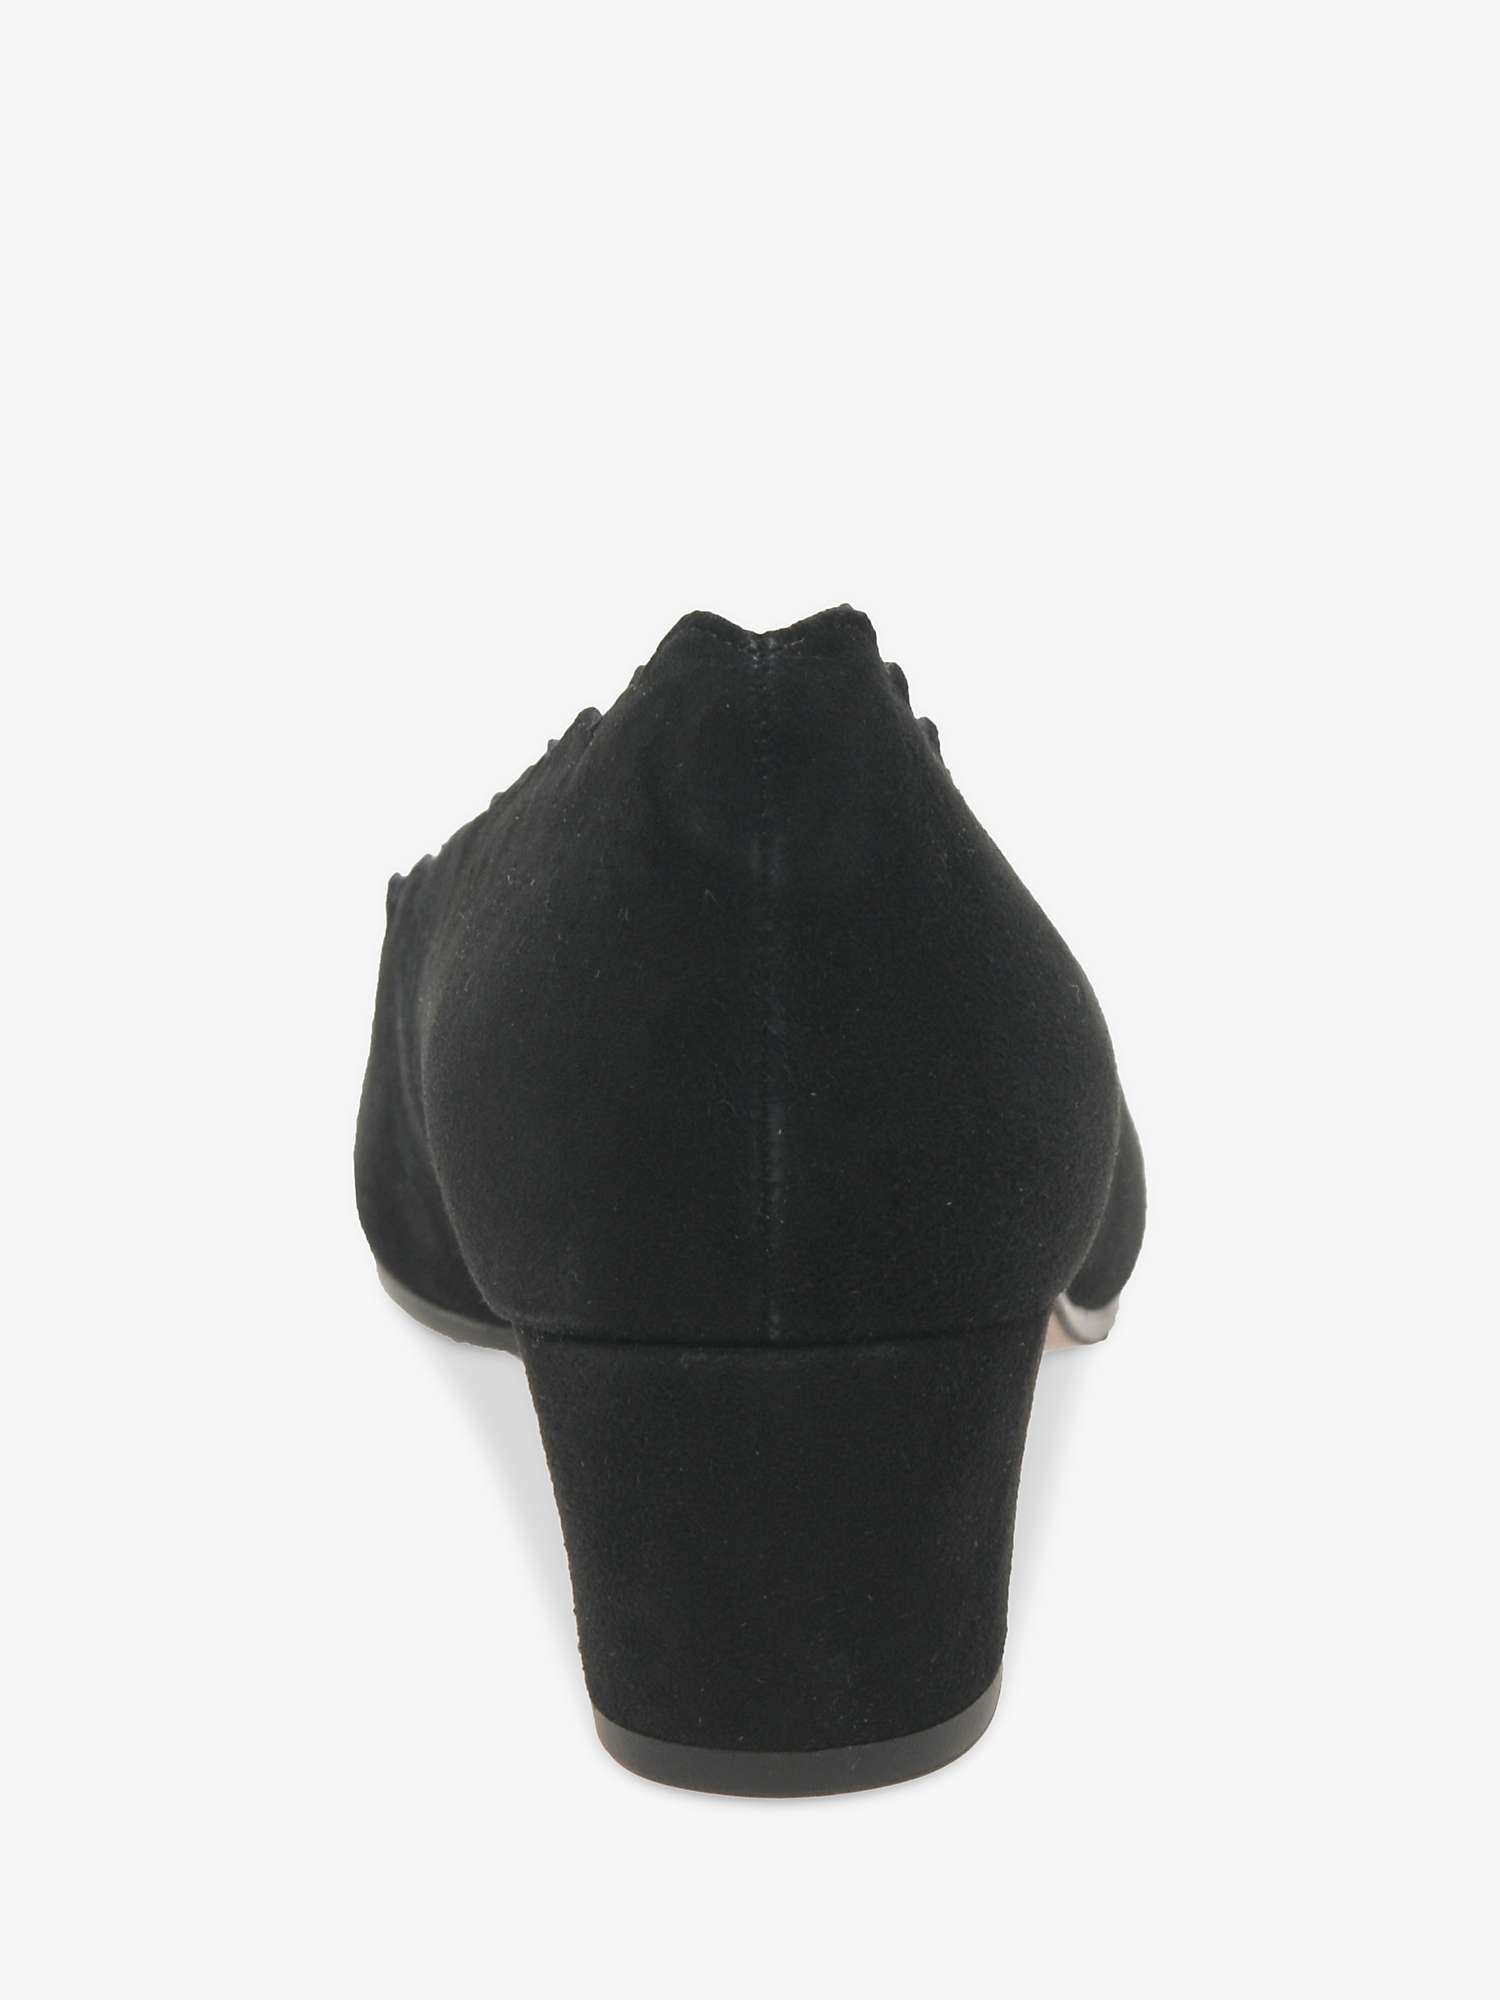 Buy Gabor Wide Fit Gigi Scallop Edge Suede Block Heeled Court Shoes Online at johnlewis.com